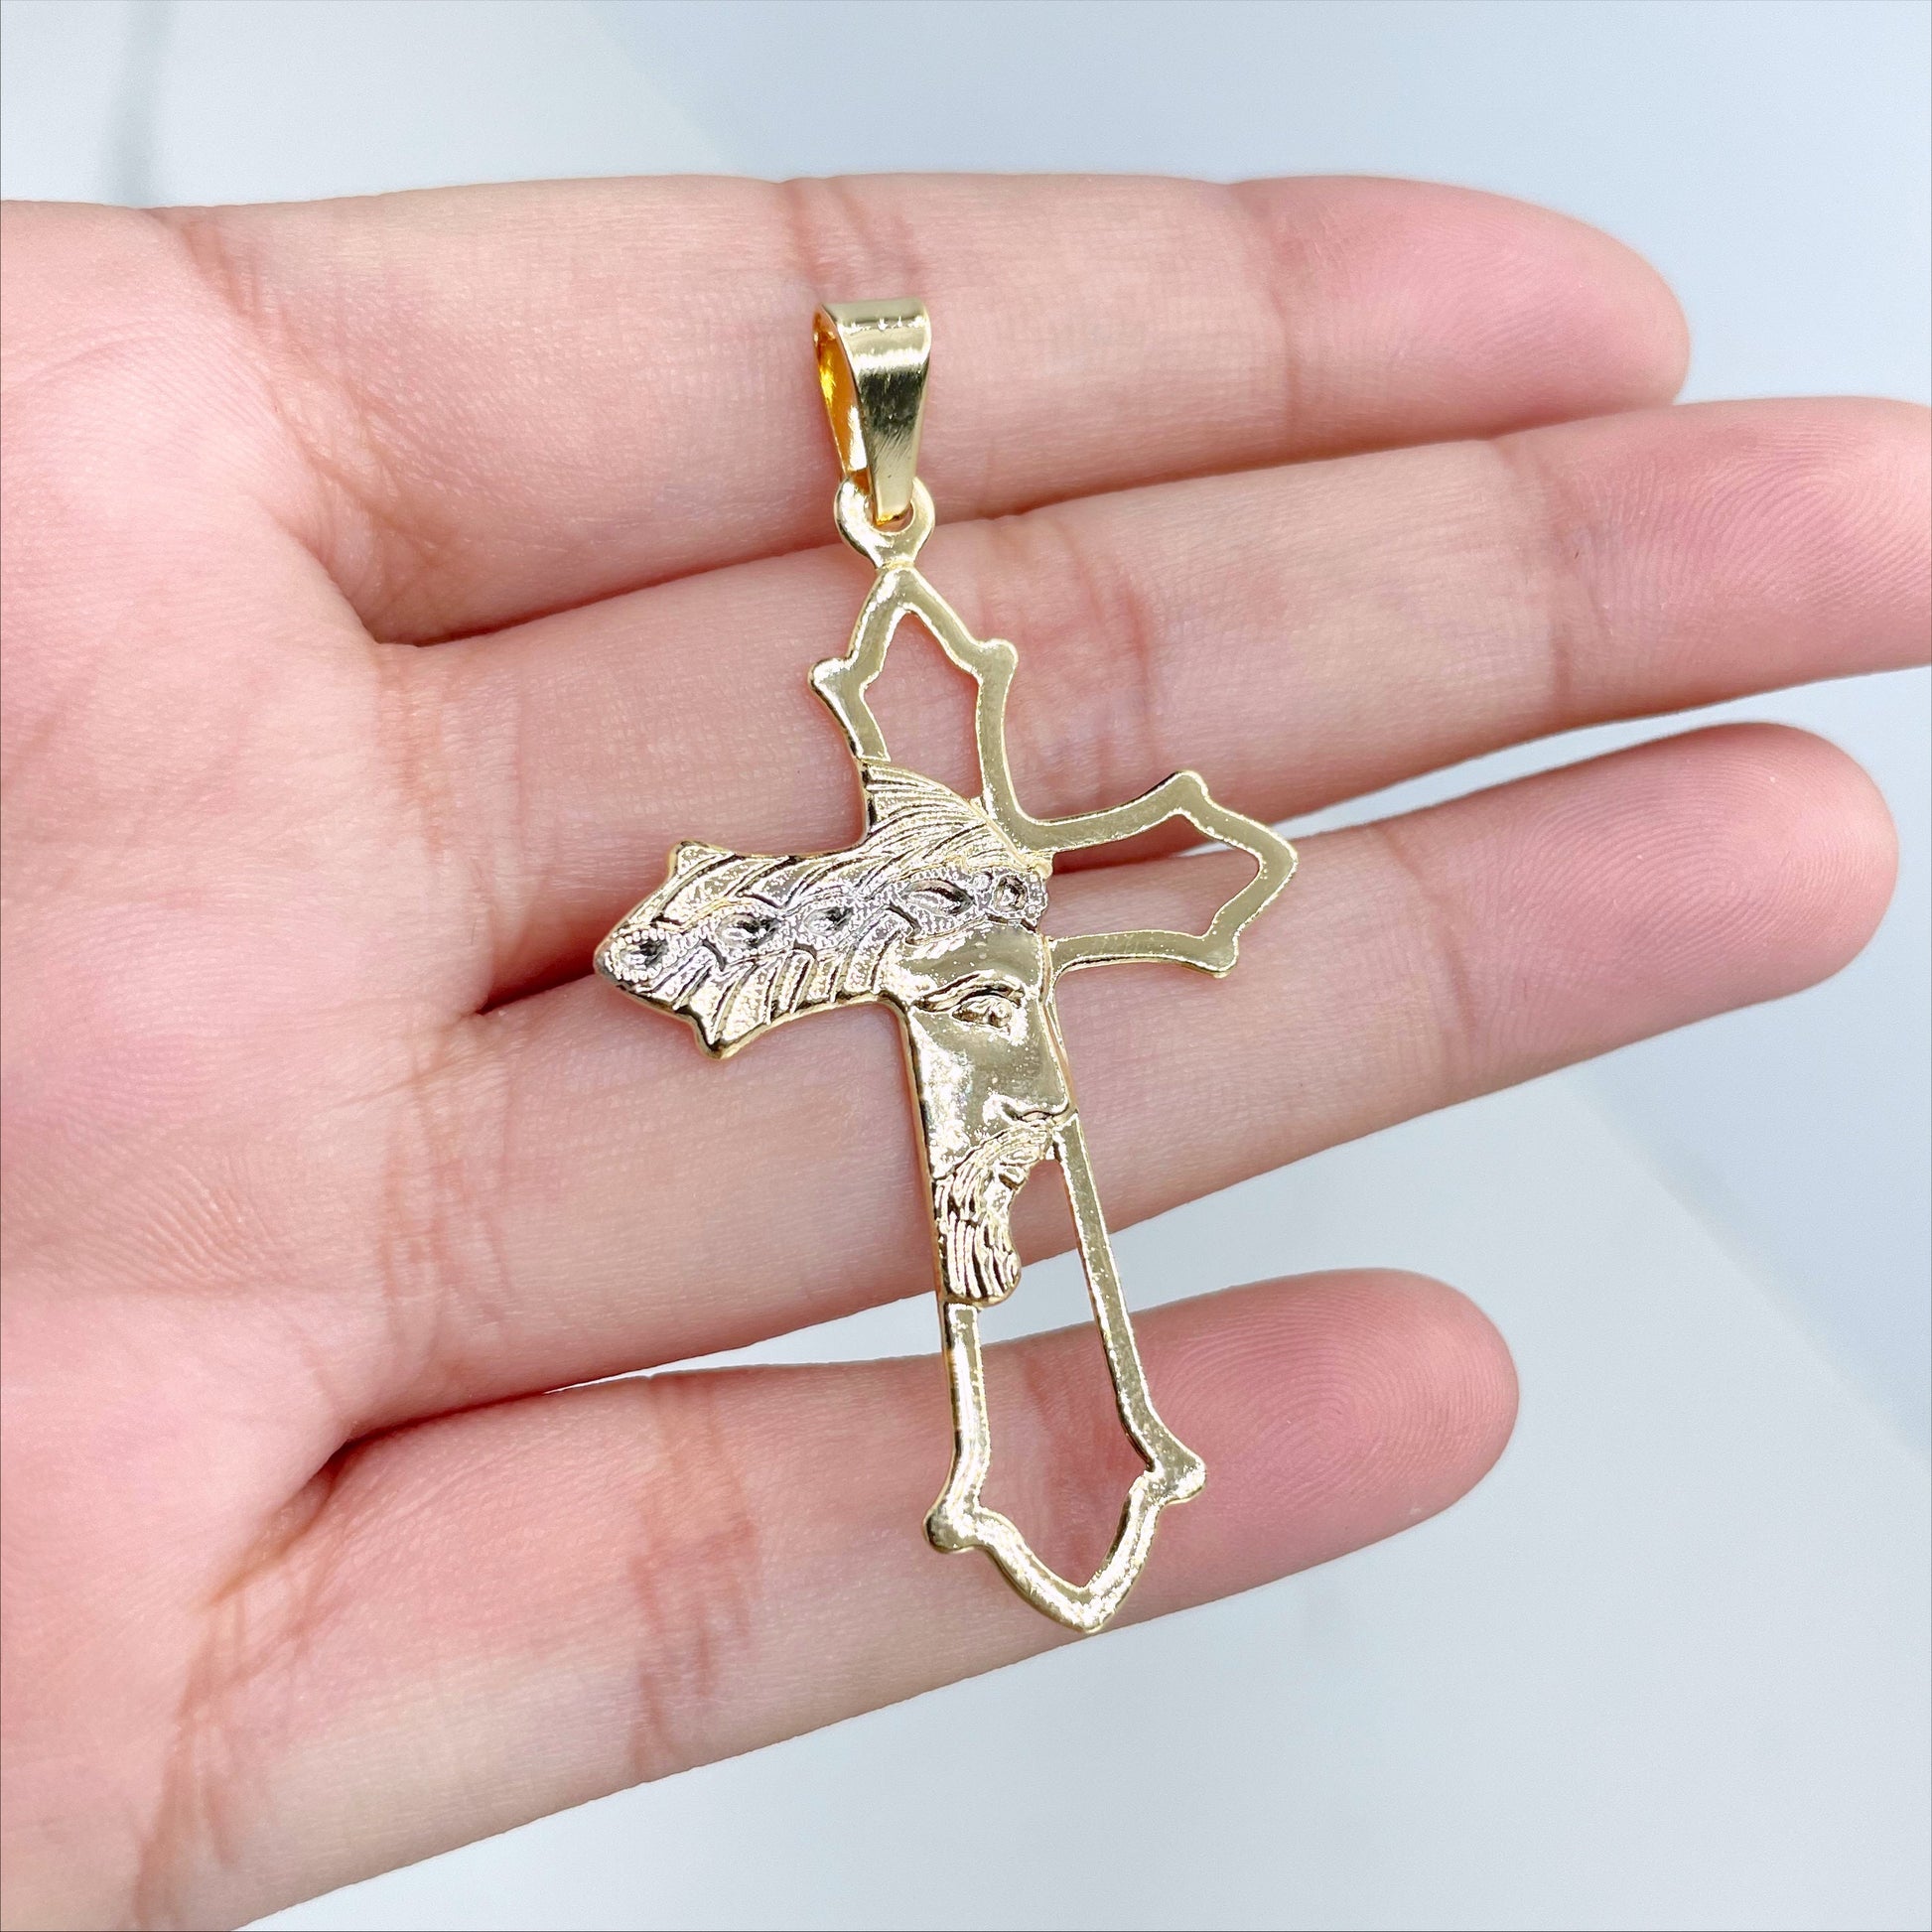 18K Gold Filled Two Tone Cross with Jesus Face Charms Pendants, Catholic Religious Holy Cross, Wholesale Jewelry Making Supplies